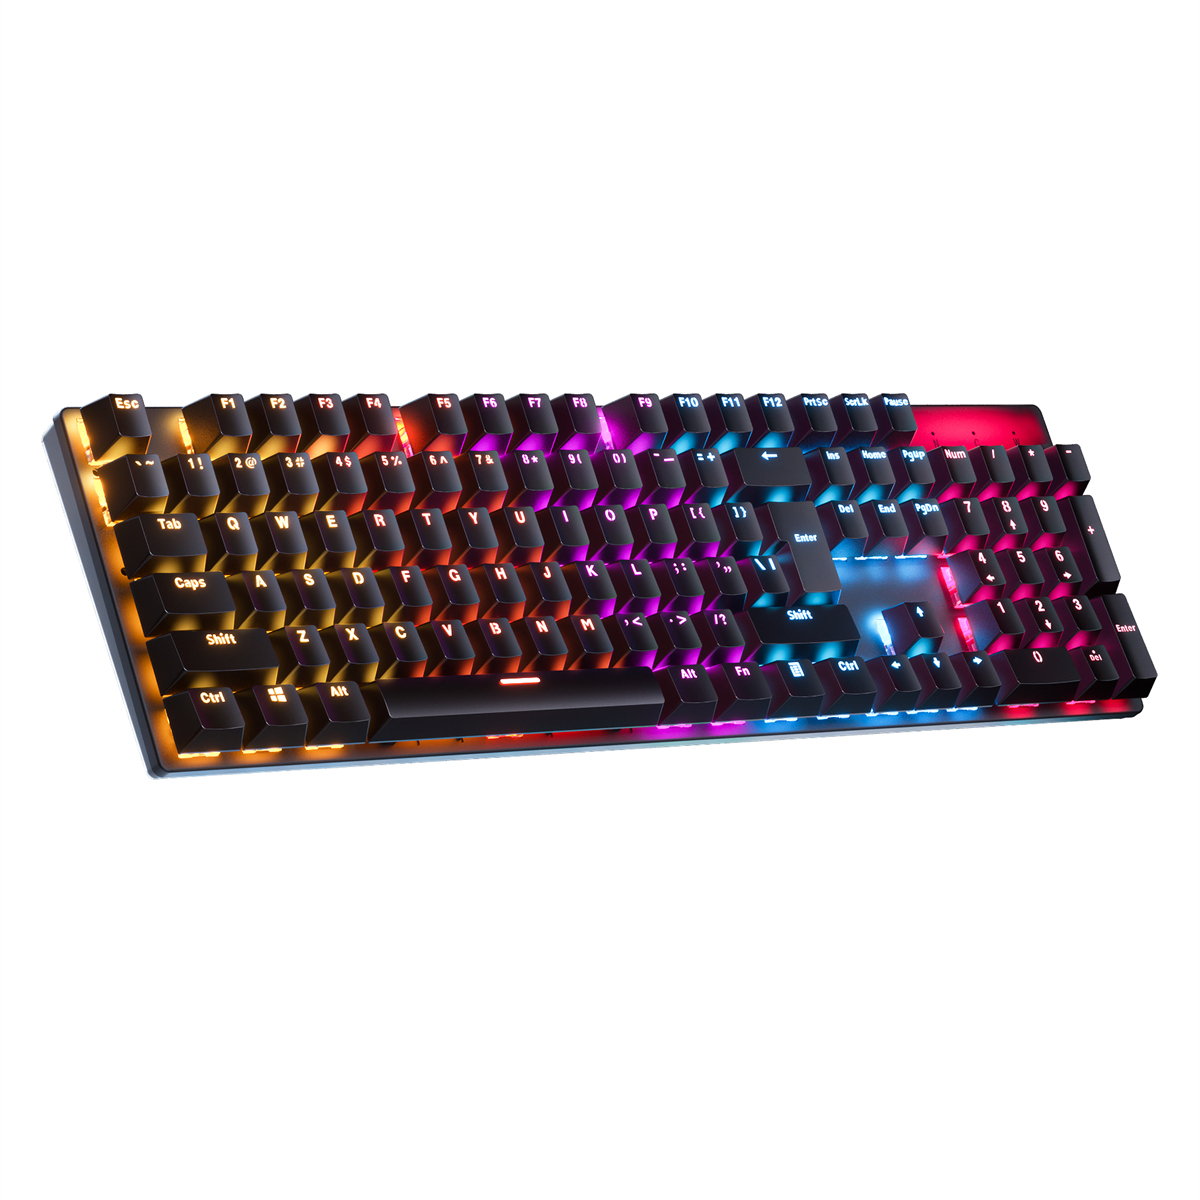 Find KA101 Mechanical Gaming Keyboard 104 Keys XA Profile PBT Double shot Molding Keycaps Blue Switch RGB Backlit USB Wired Keyboard for Sale on Gipsybee.com with cryptocurrencies